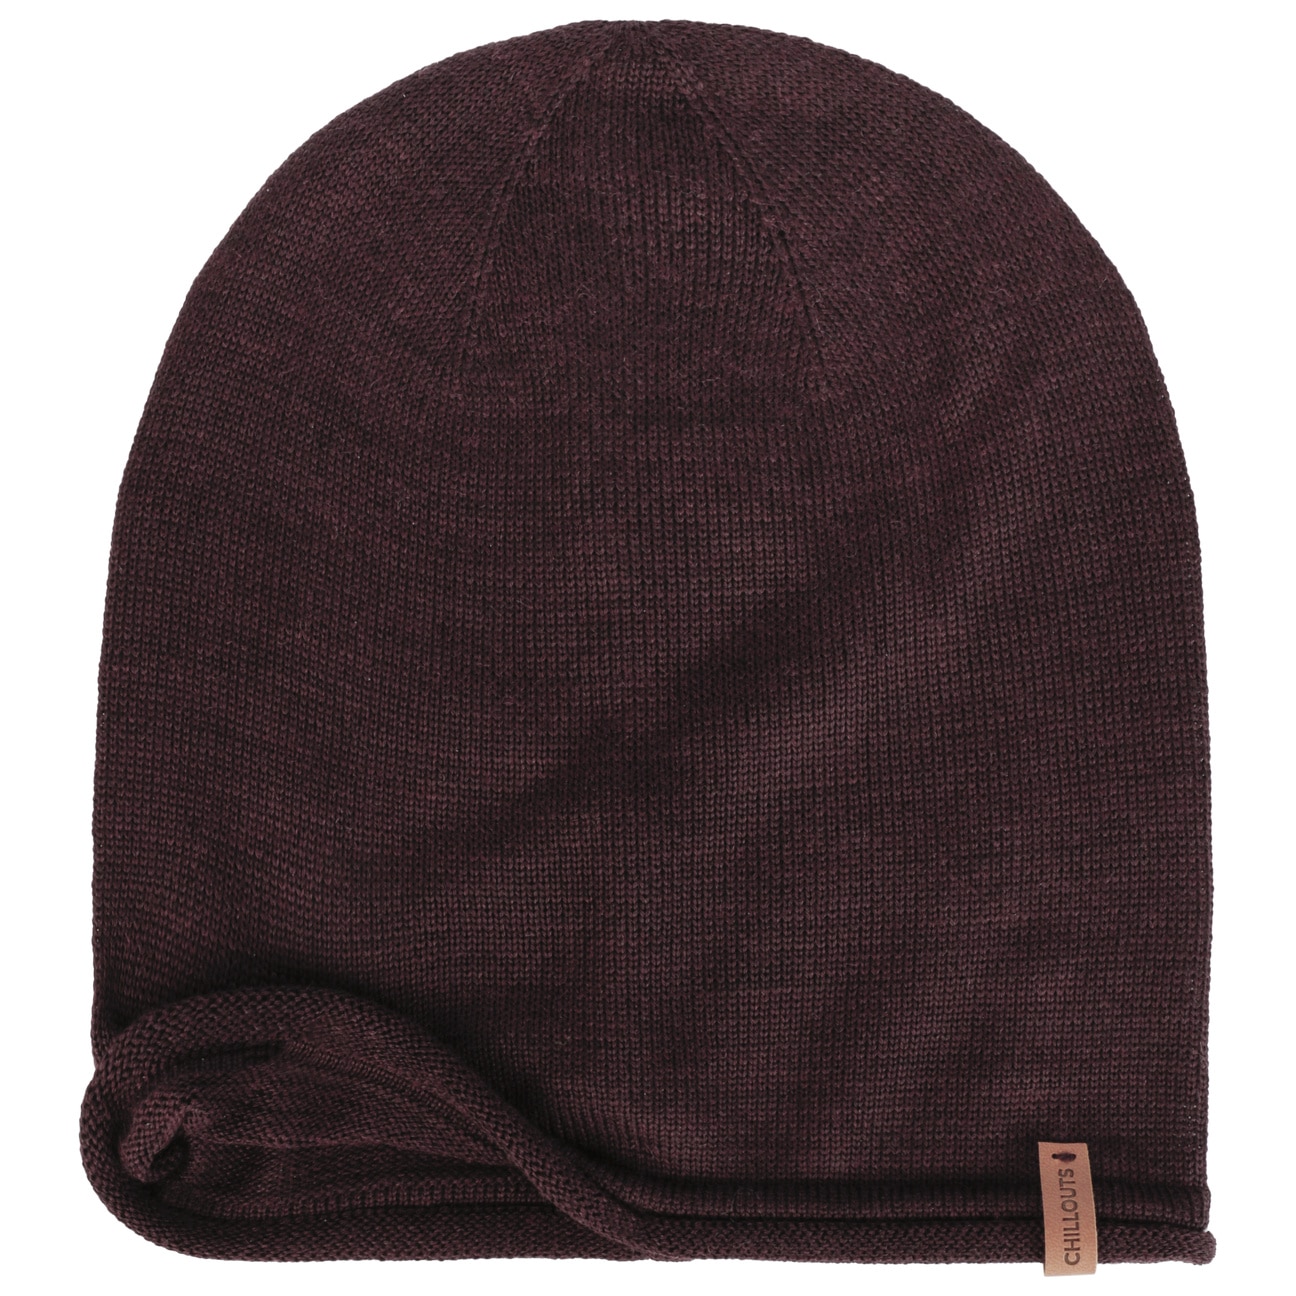 Berretto Beanie Leicester by Chillouts € - 27,99